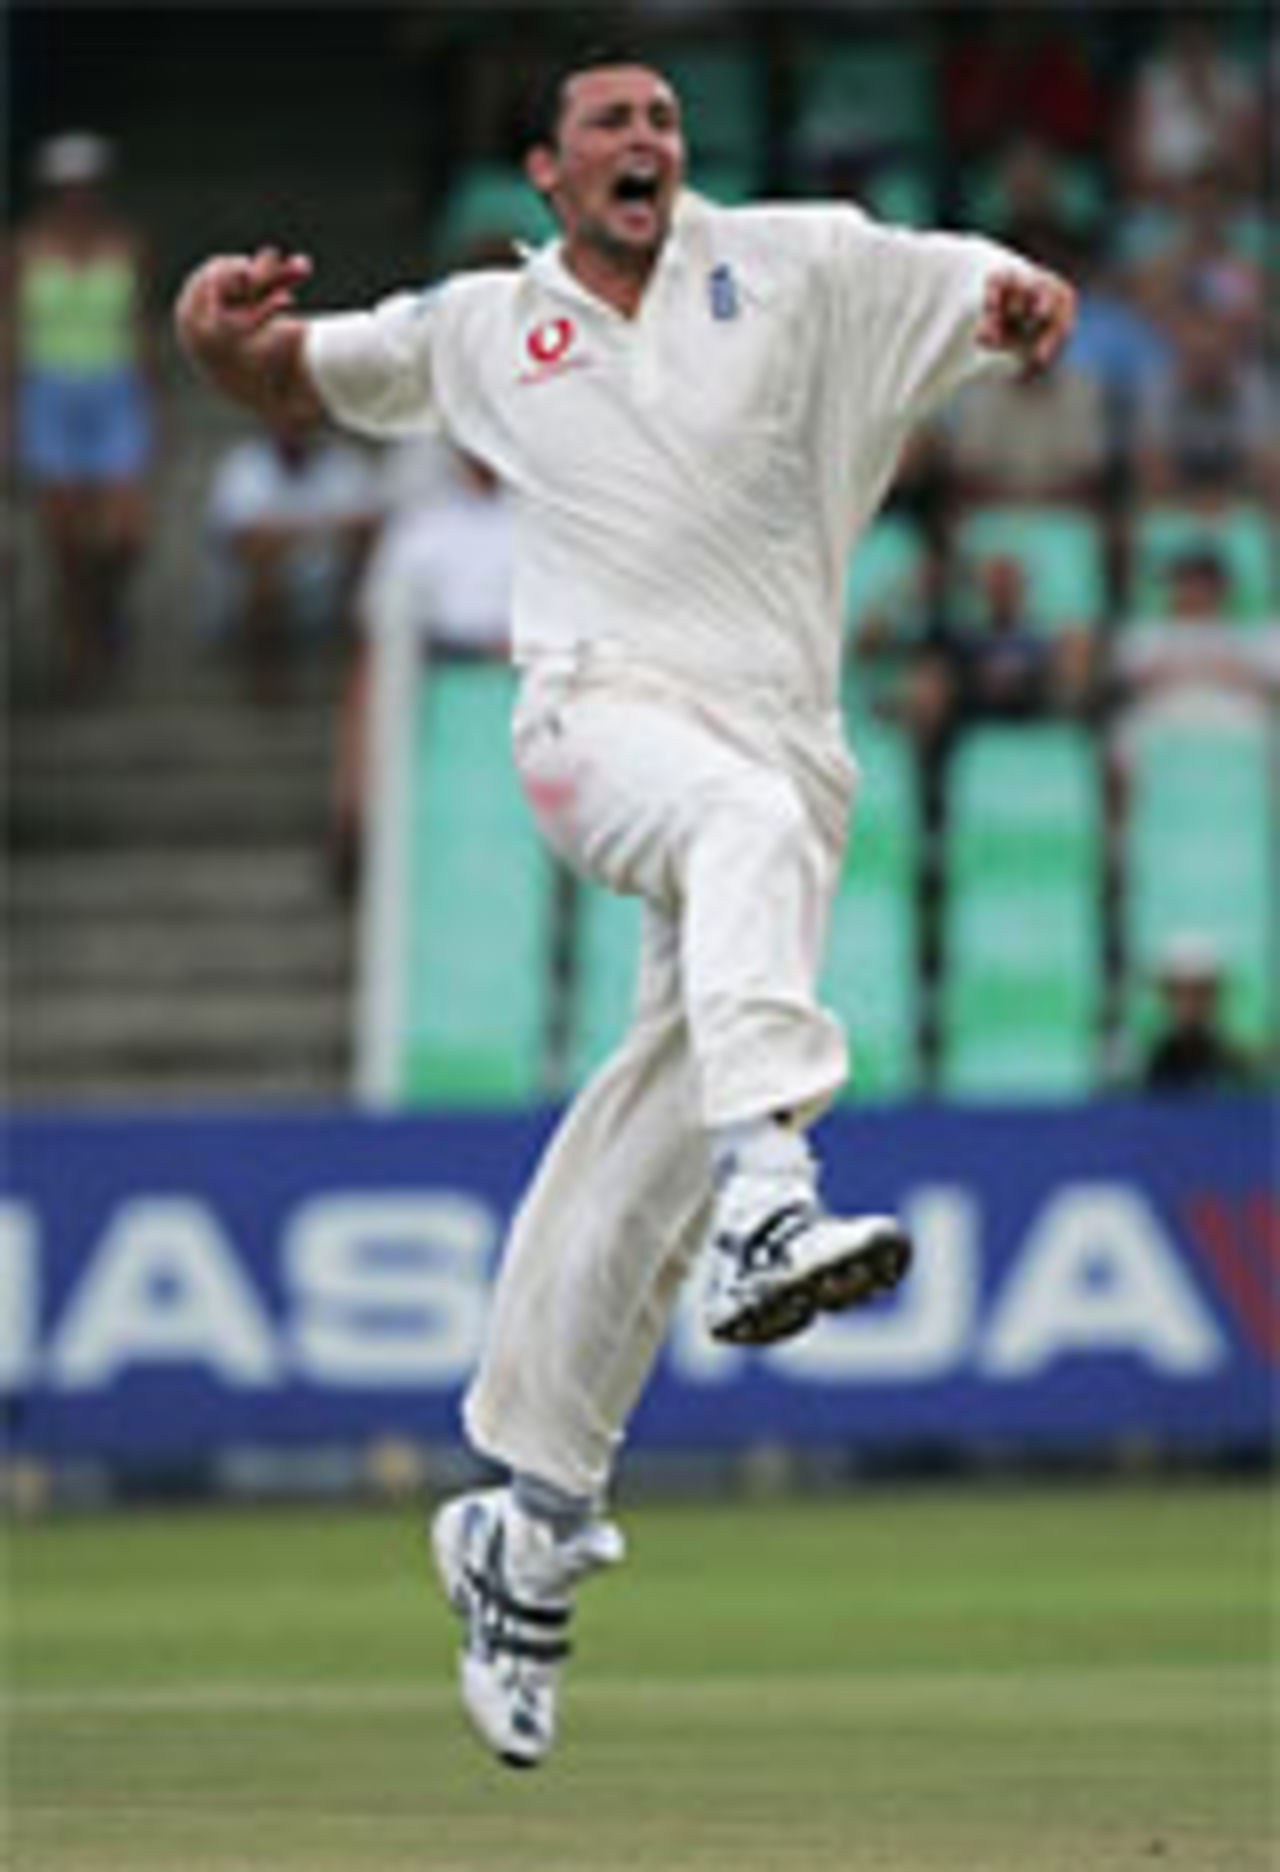 Steve Harmison celebrates making history, as he becomes the highest English wicket taker in a calendar year, with 64, at Kingsmead, second Test, South Africa v England, December 26, 2004